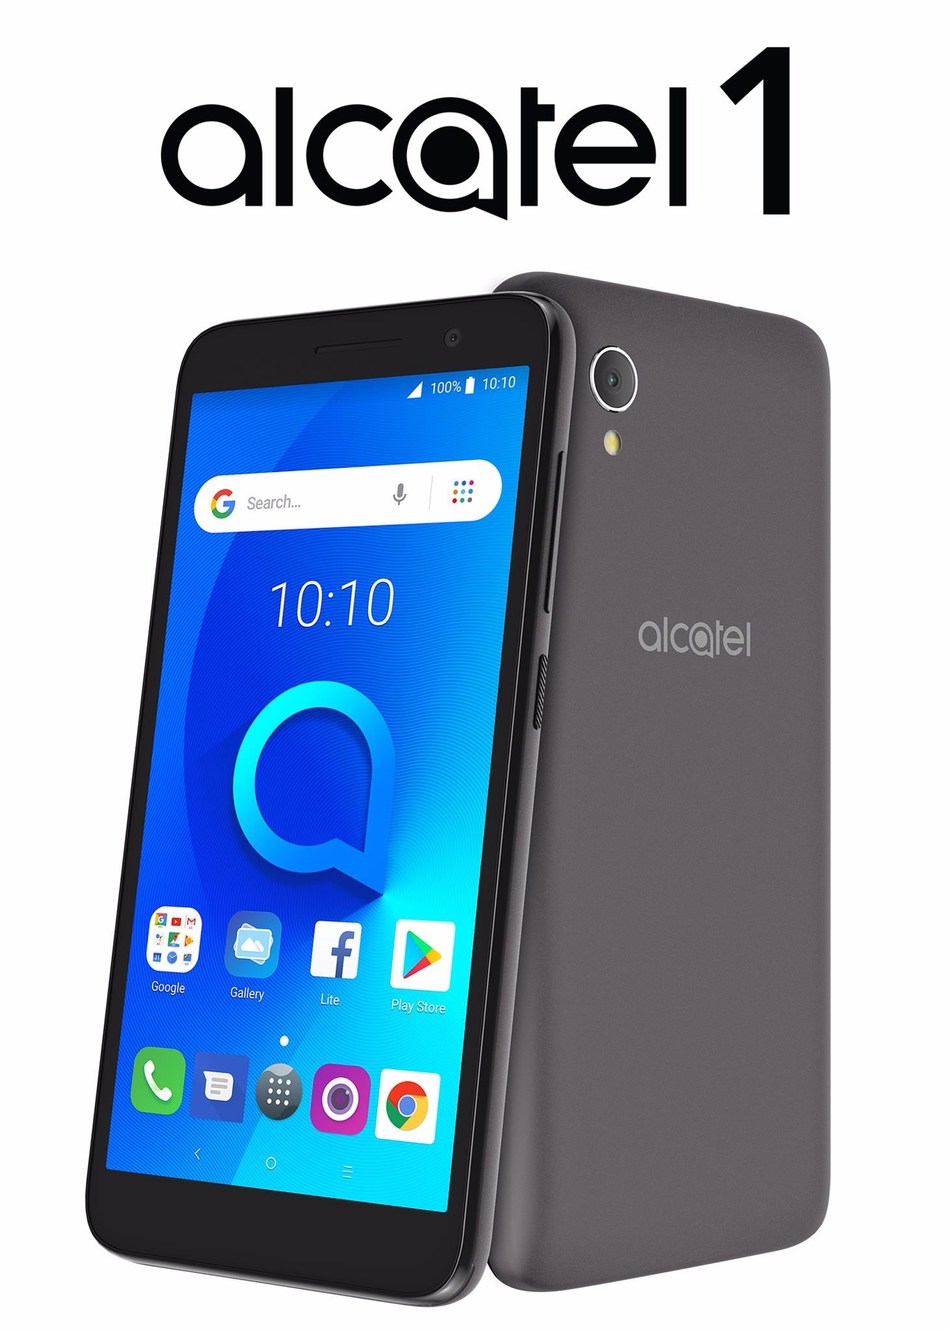 Alcatel Brings Android Oreo Go Edition To Ultra Affordable Smartphones In Canada